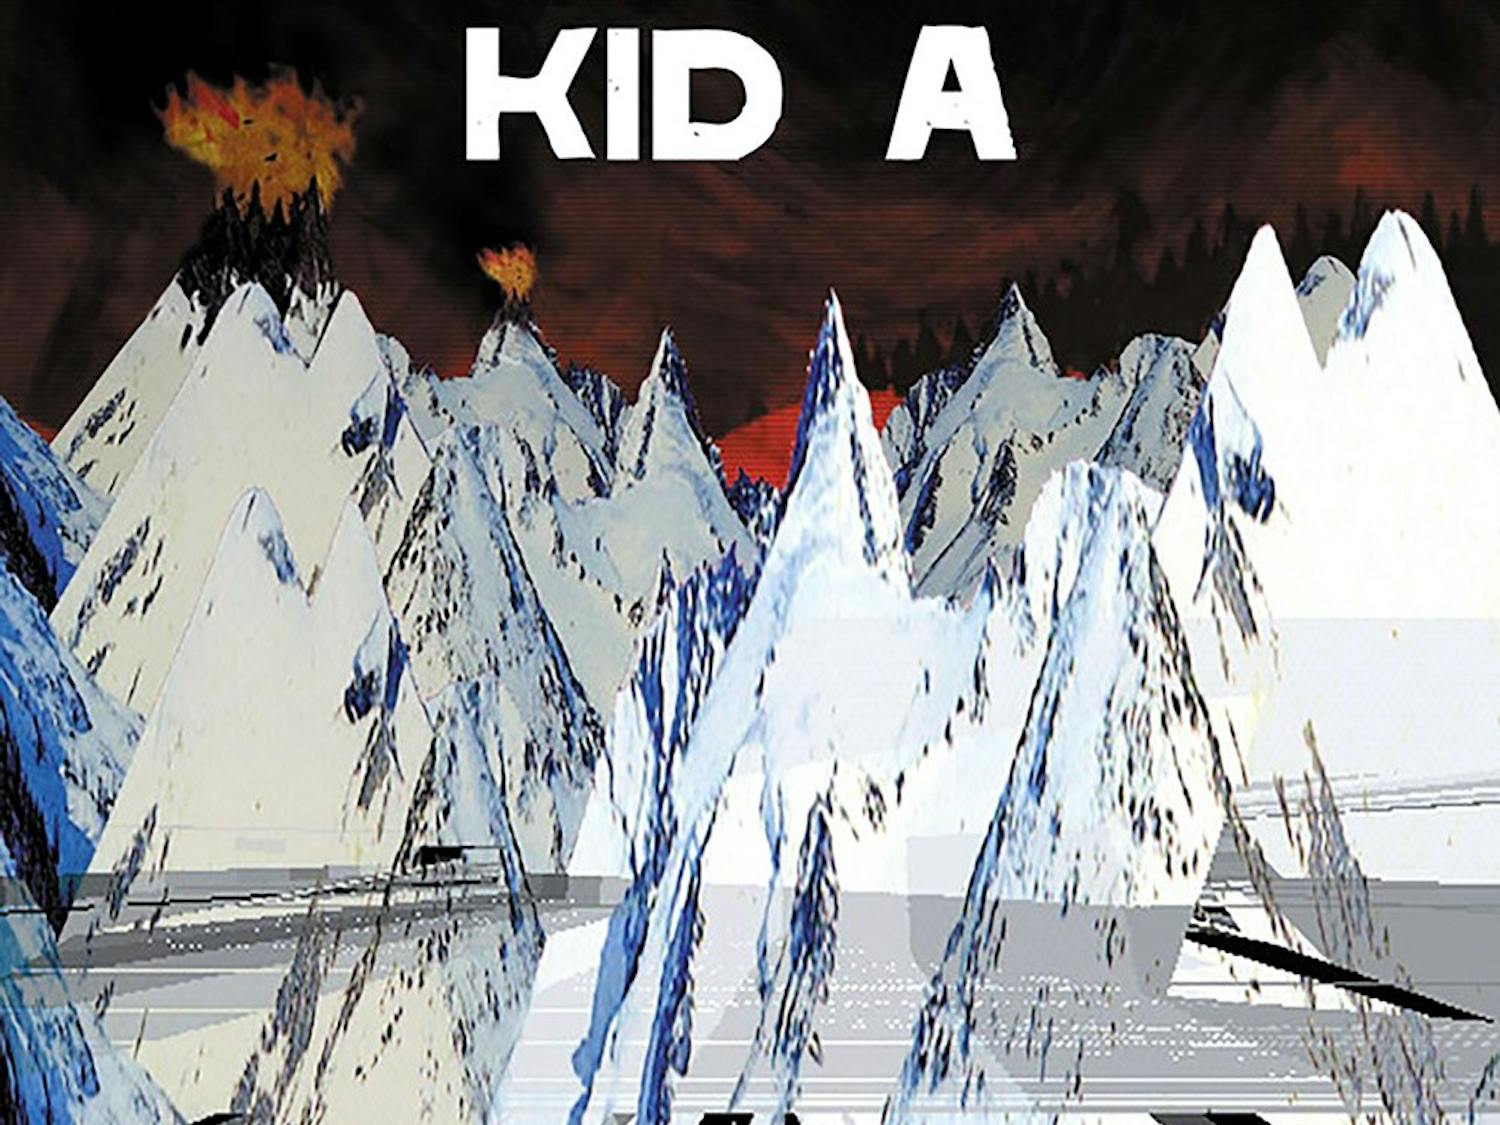 "How to Disappear Completely" from Radiohead's 2000 album Kid A&nbsp;is one of many featured songs on our Finals Weeks playlist. Check out these soothing tunes to help you get through hours of studying and schoolwork.